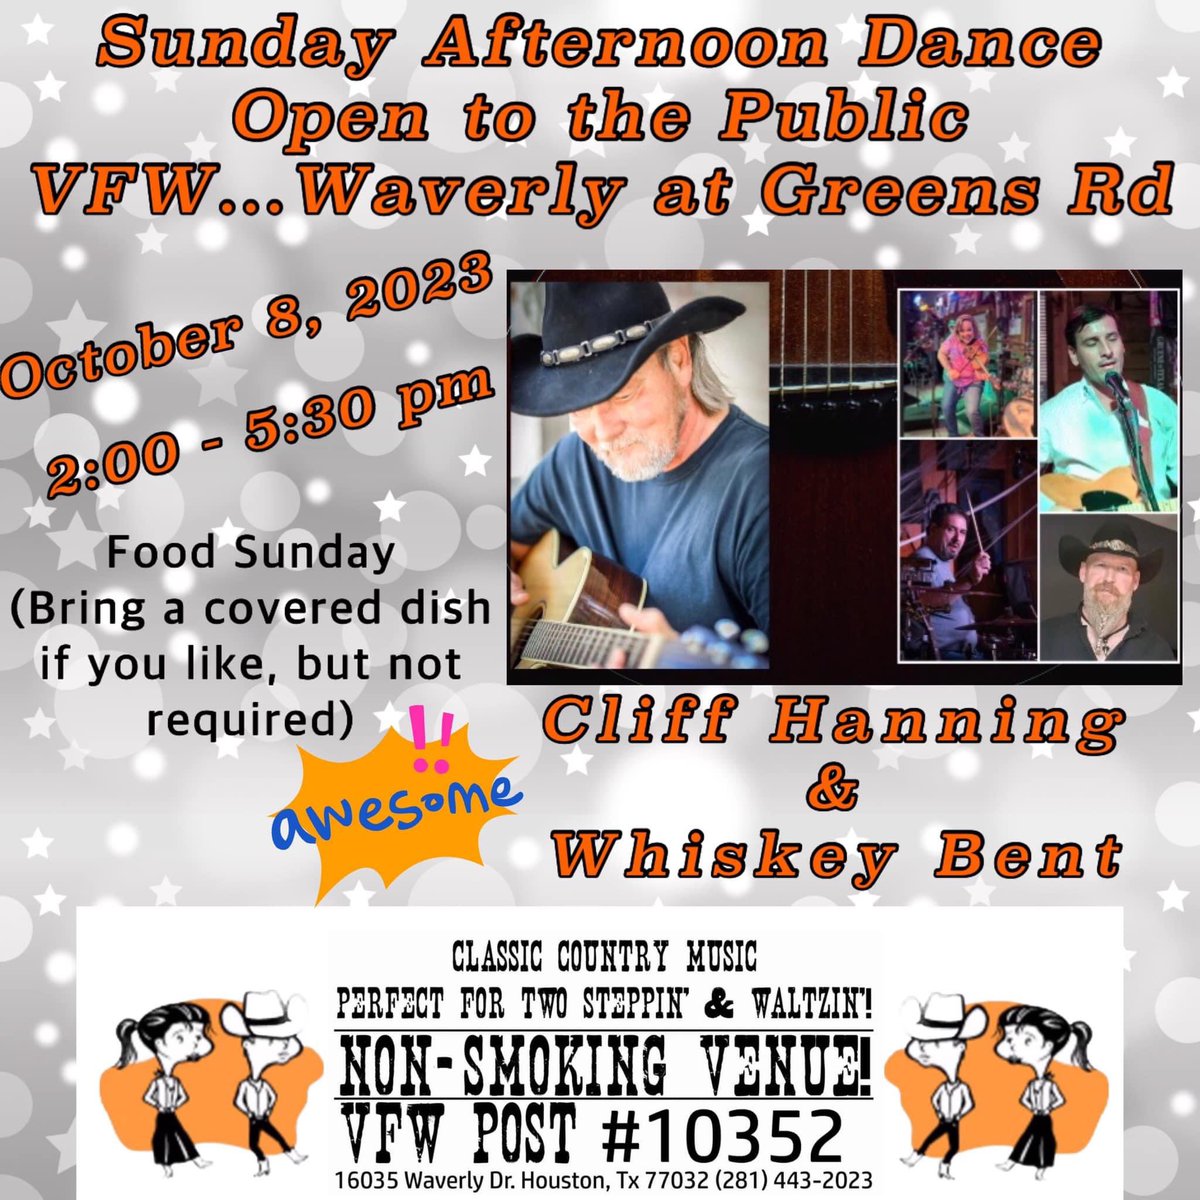 TODAY at VFW #10352, Dance to live music from 2-5:30pm! $10. 

Today's band: Cliff Hanning & Whiskey Bent! 

16035 Waverly Drive, Houston, TX 77032

#Houston #CountryWesternDance #CountryMusic #houstontx #harriscounty #liveband #countrywestern #vfw #vfw10352